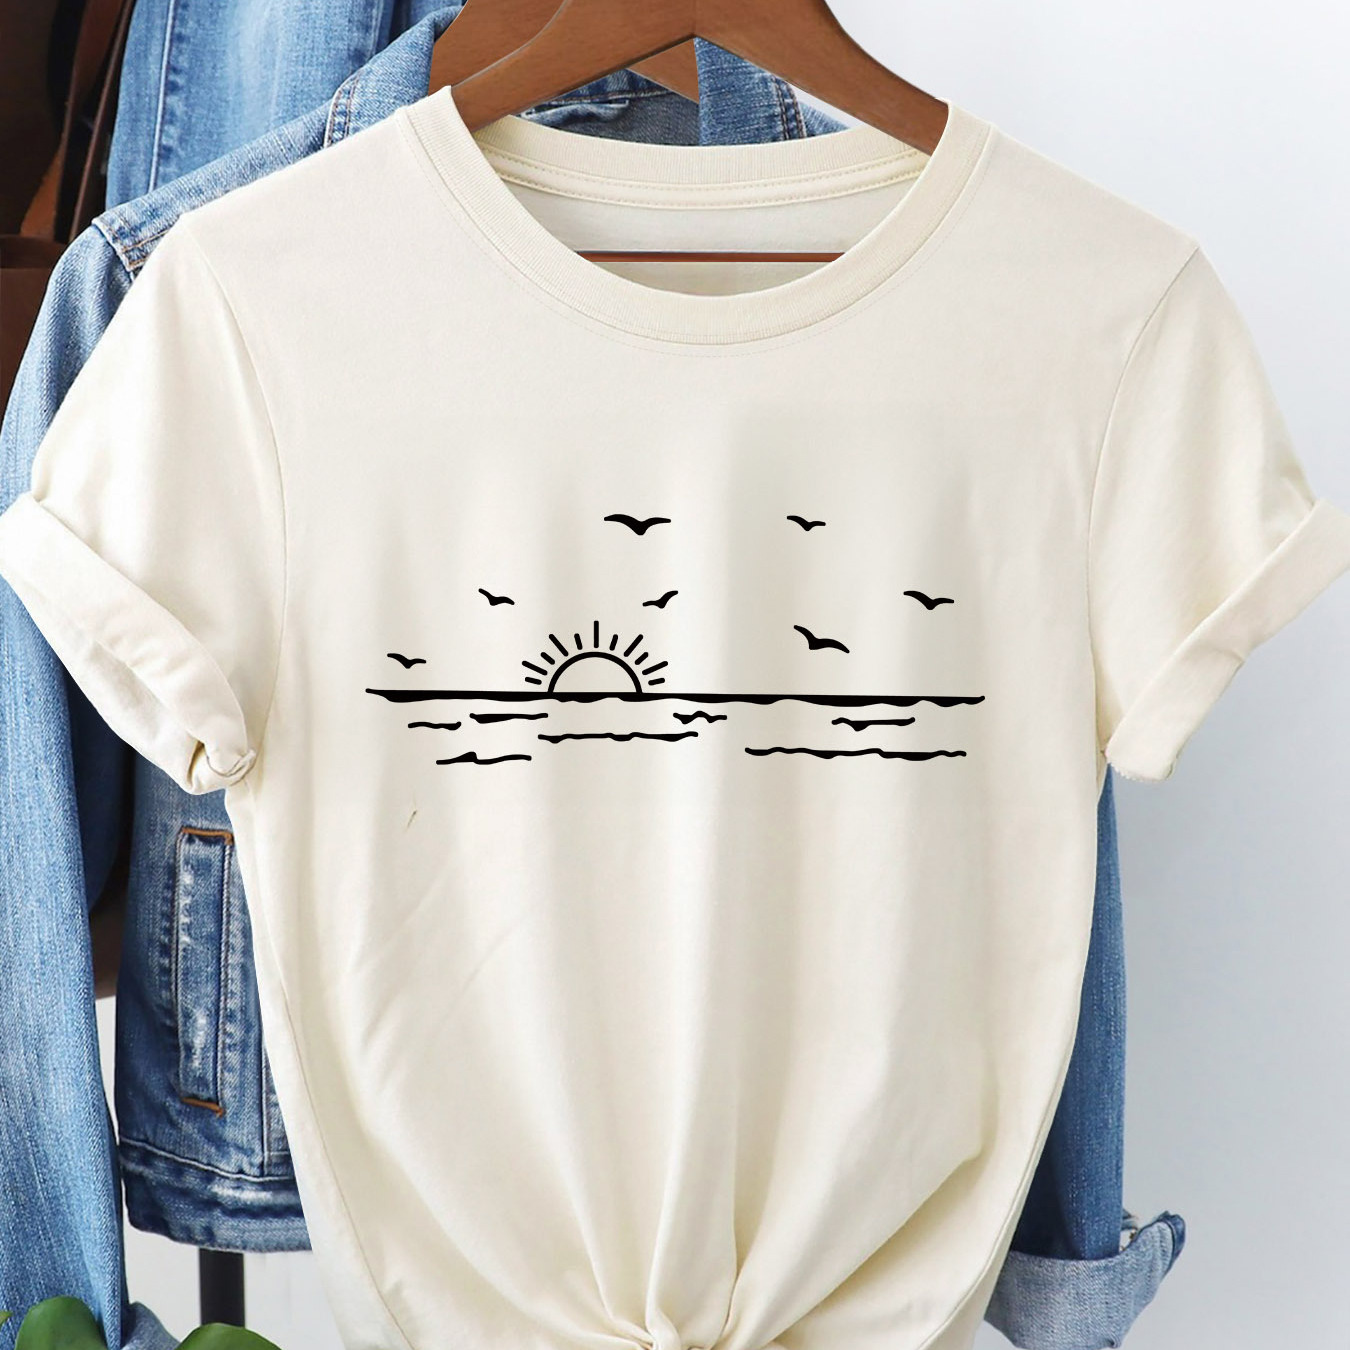 

Sun Seagull Print T-shirt, Short Sleeve Crew Neck Casual Top For Summer & Spring, Women's Clothing